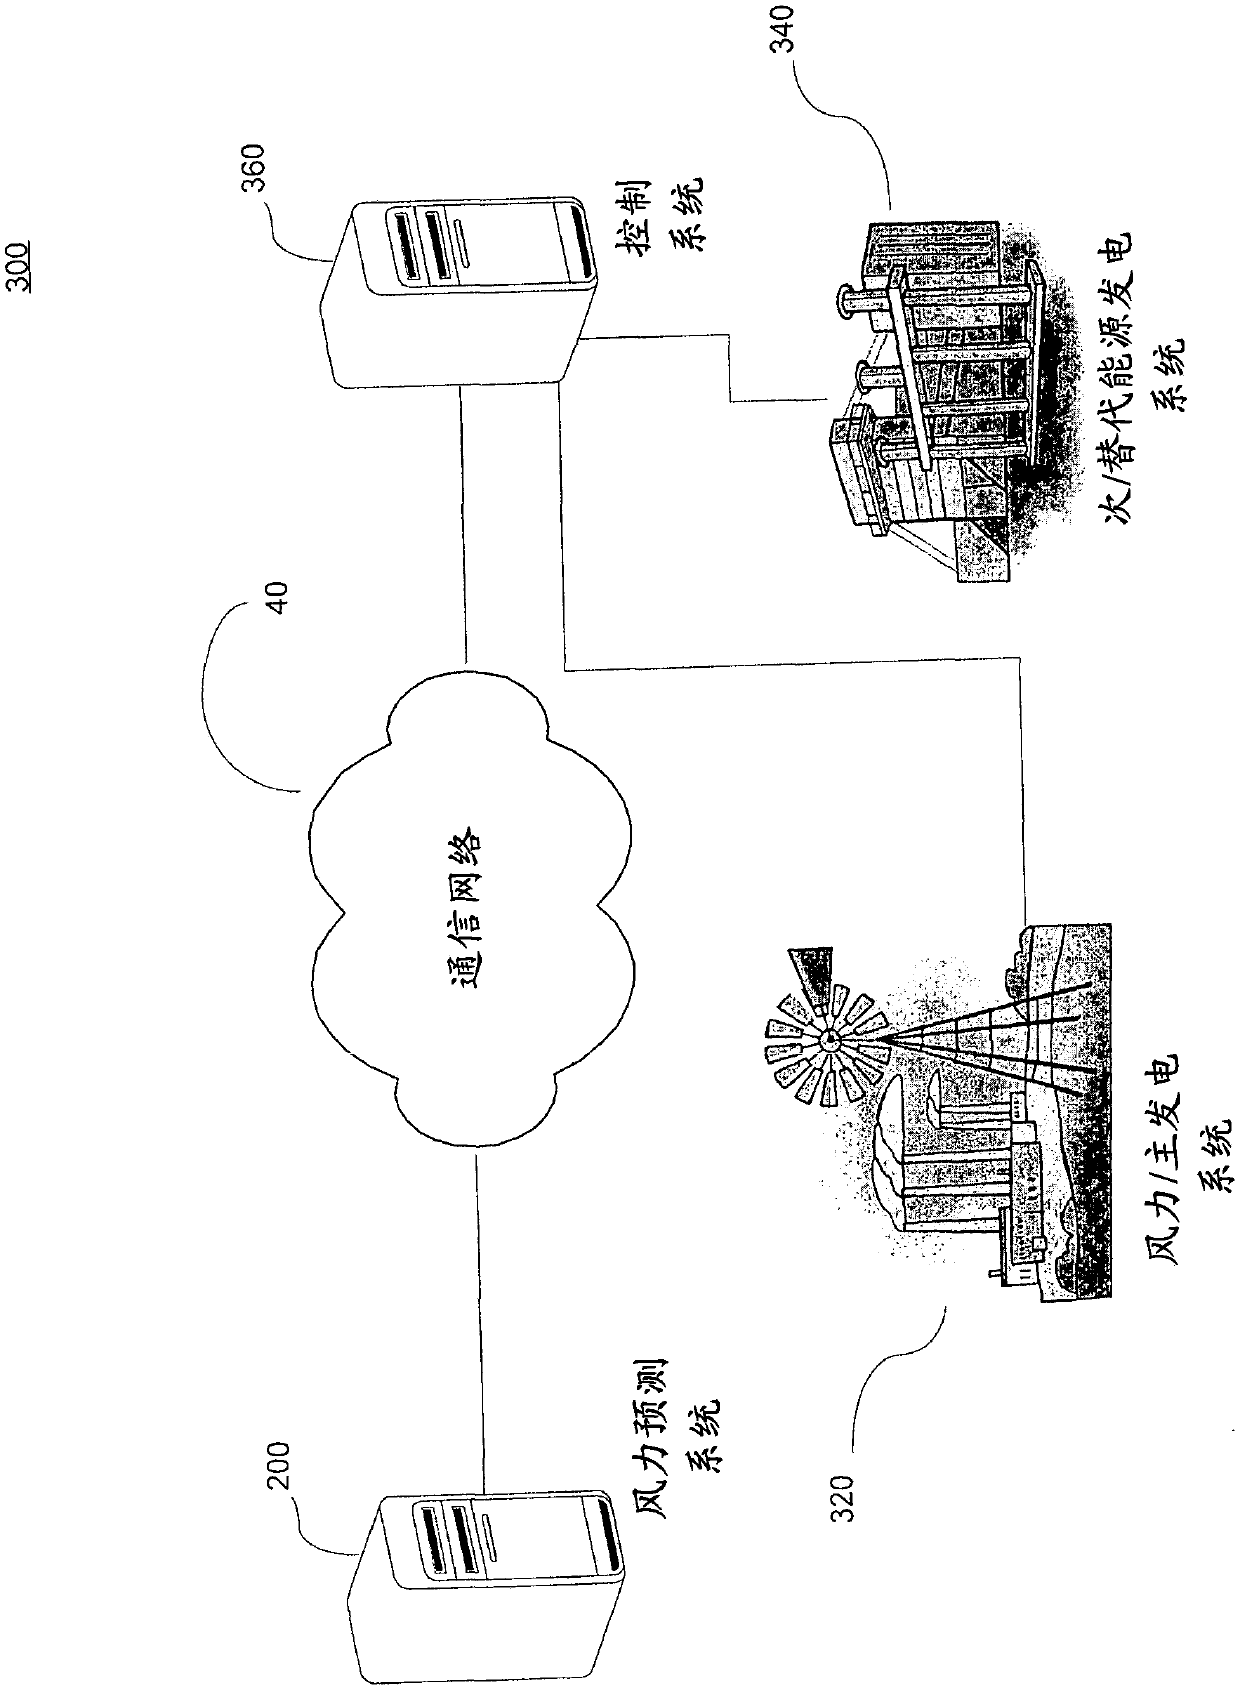 System and method for performing wind forecasting